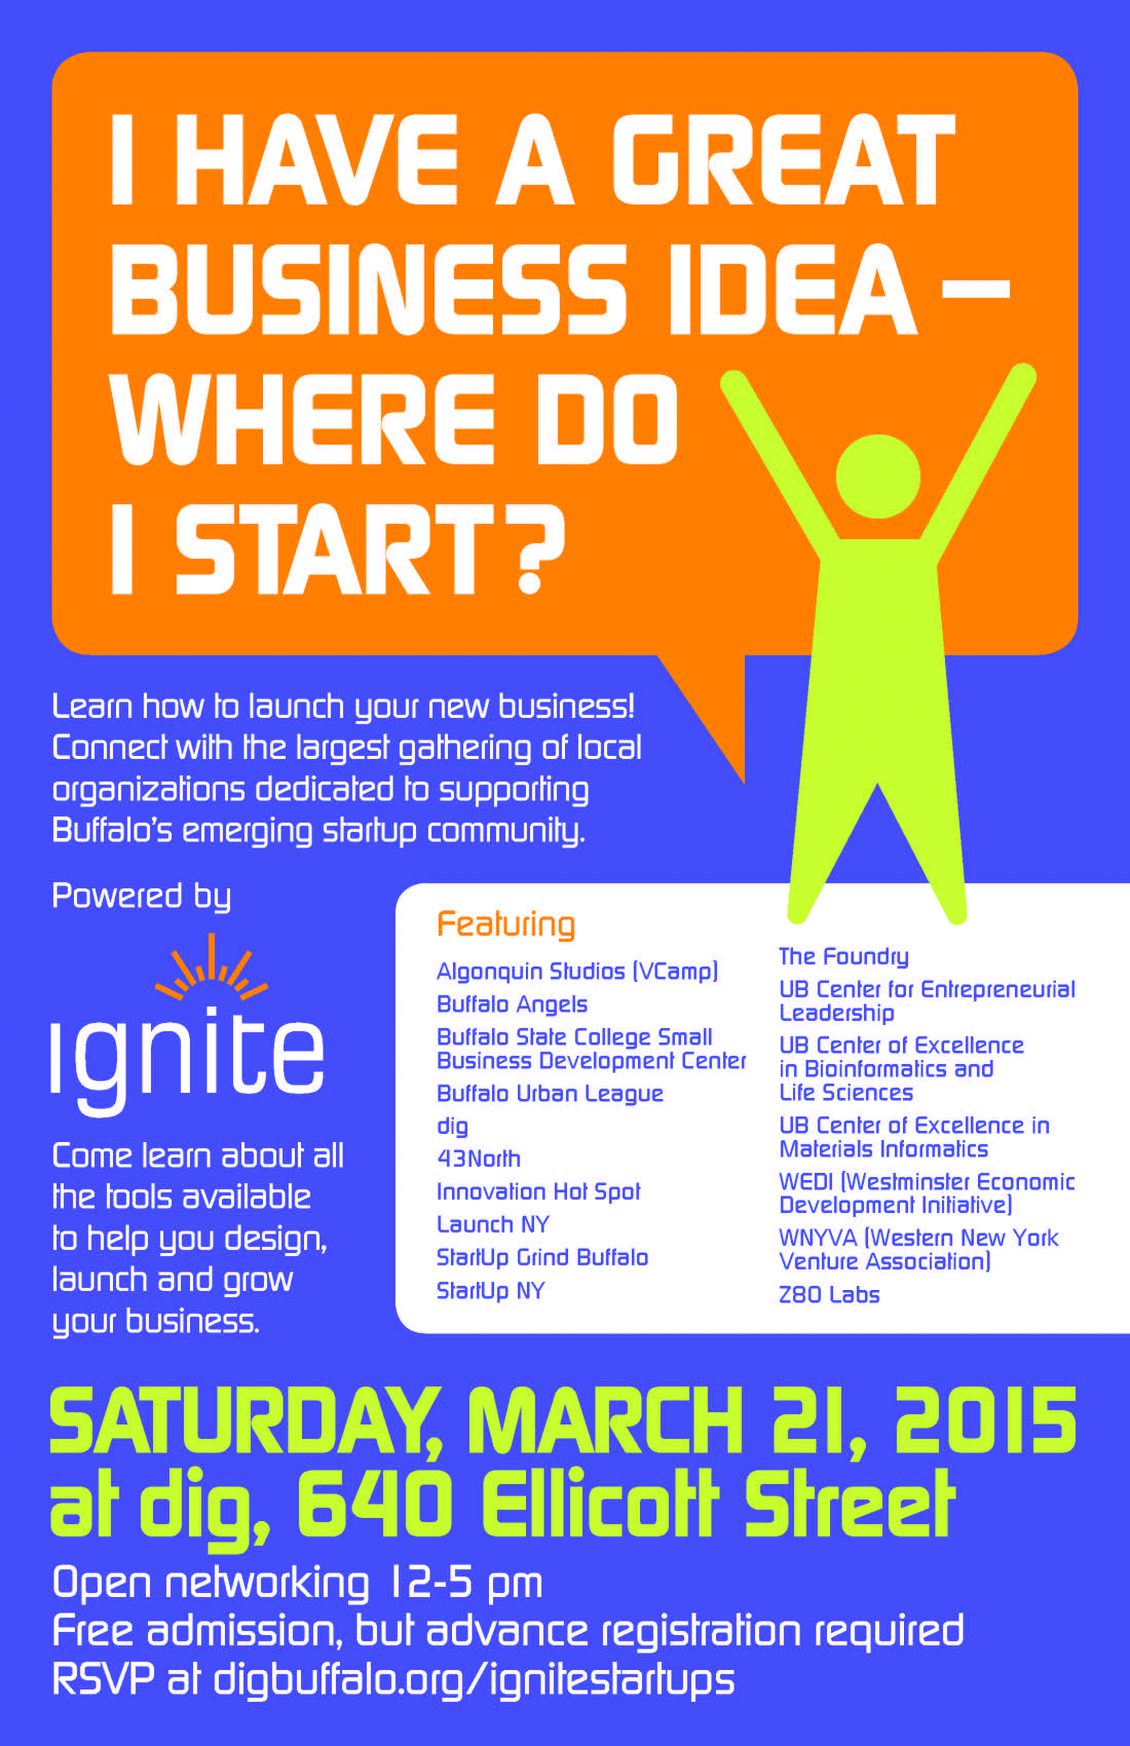 Event to Showcase Resources for Entrepreneurs